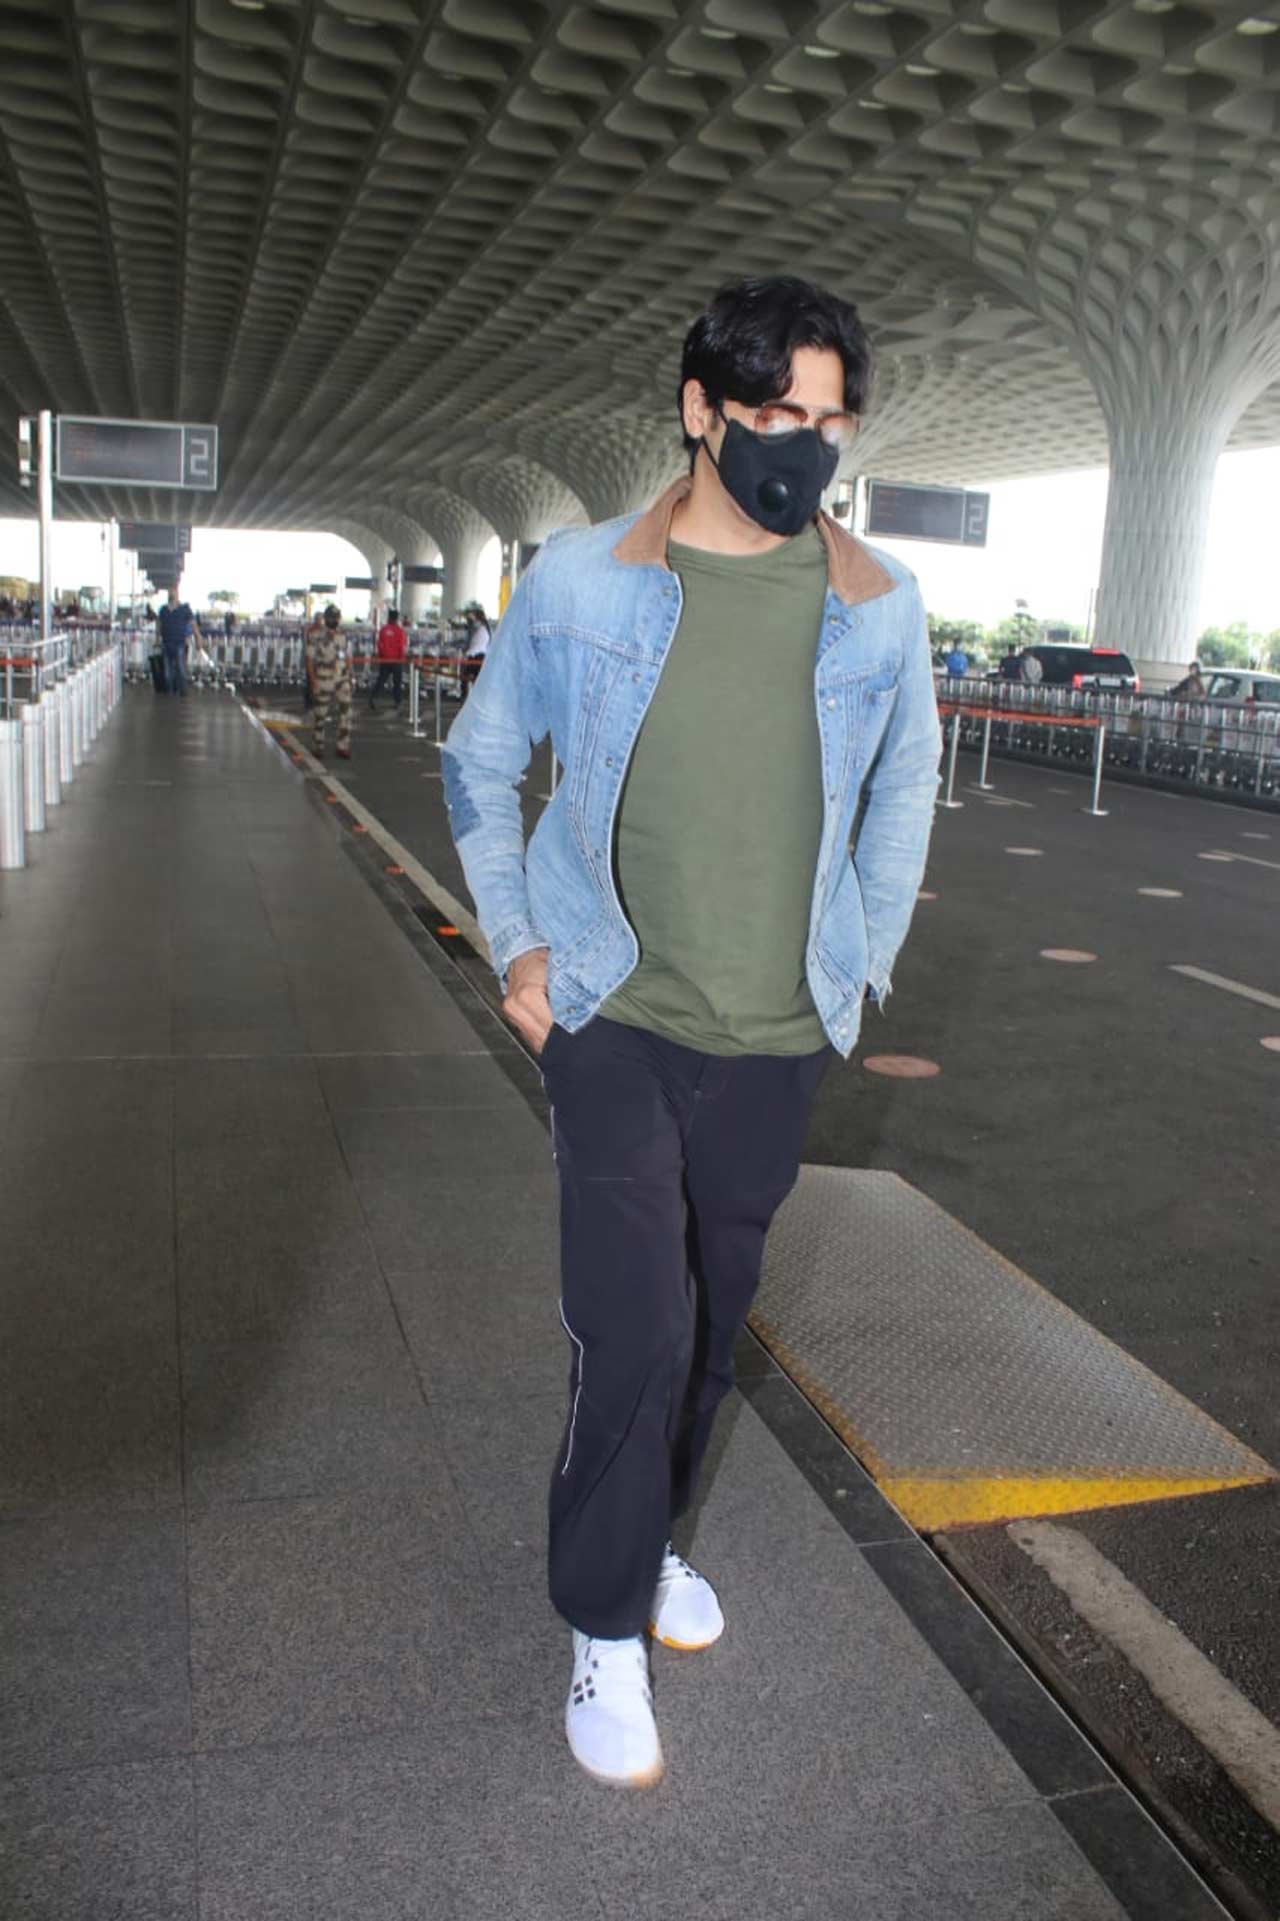 Mission Majnu actor Sidharth Malhotra was also spotted at the Mumbai airport. Speaking about the film, the espionage thriller helmed by Shantanu Bagchi is based on an ambitious covert operation of India and is inspired by real events of the 1970s. It is the story of an Indian mission in Pakistan. 